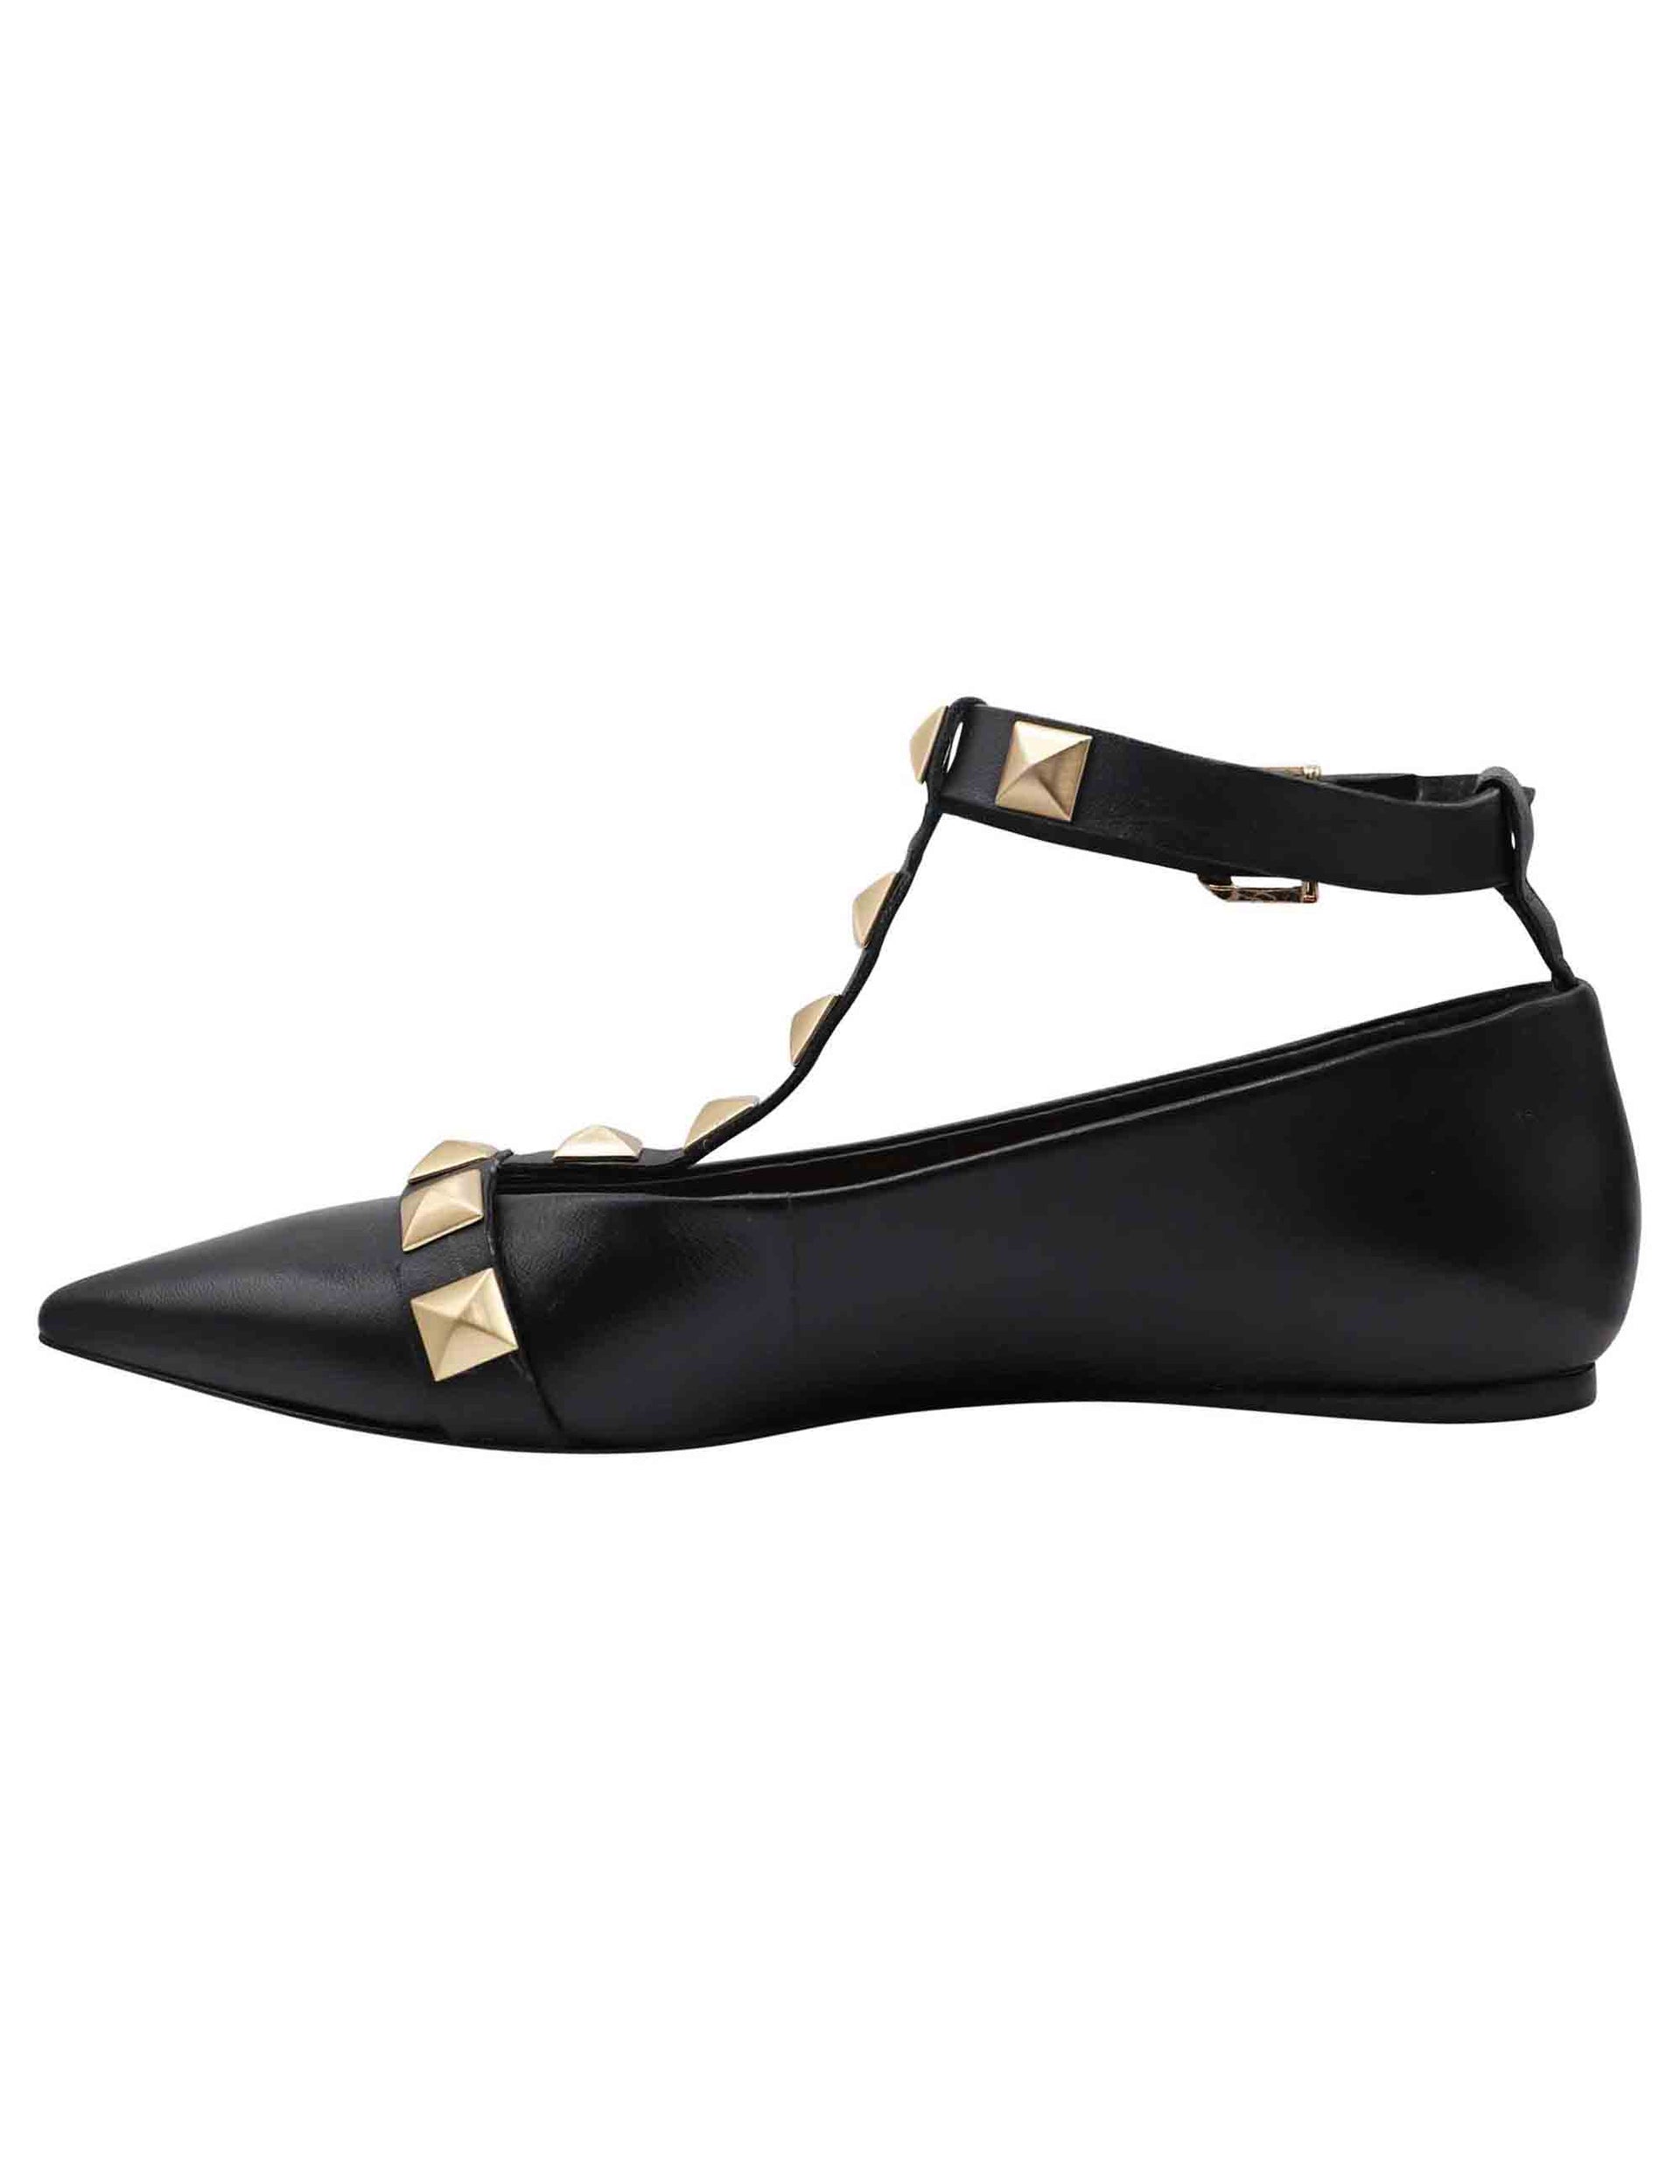 Women's black leather ballet flats with pointed toe straps and studs